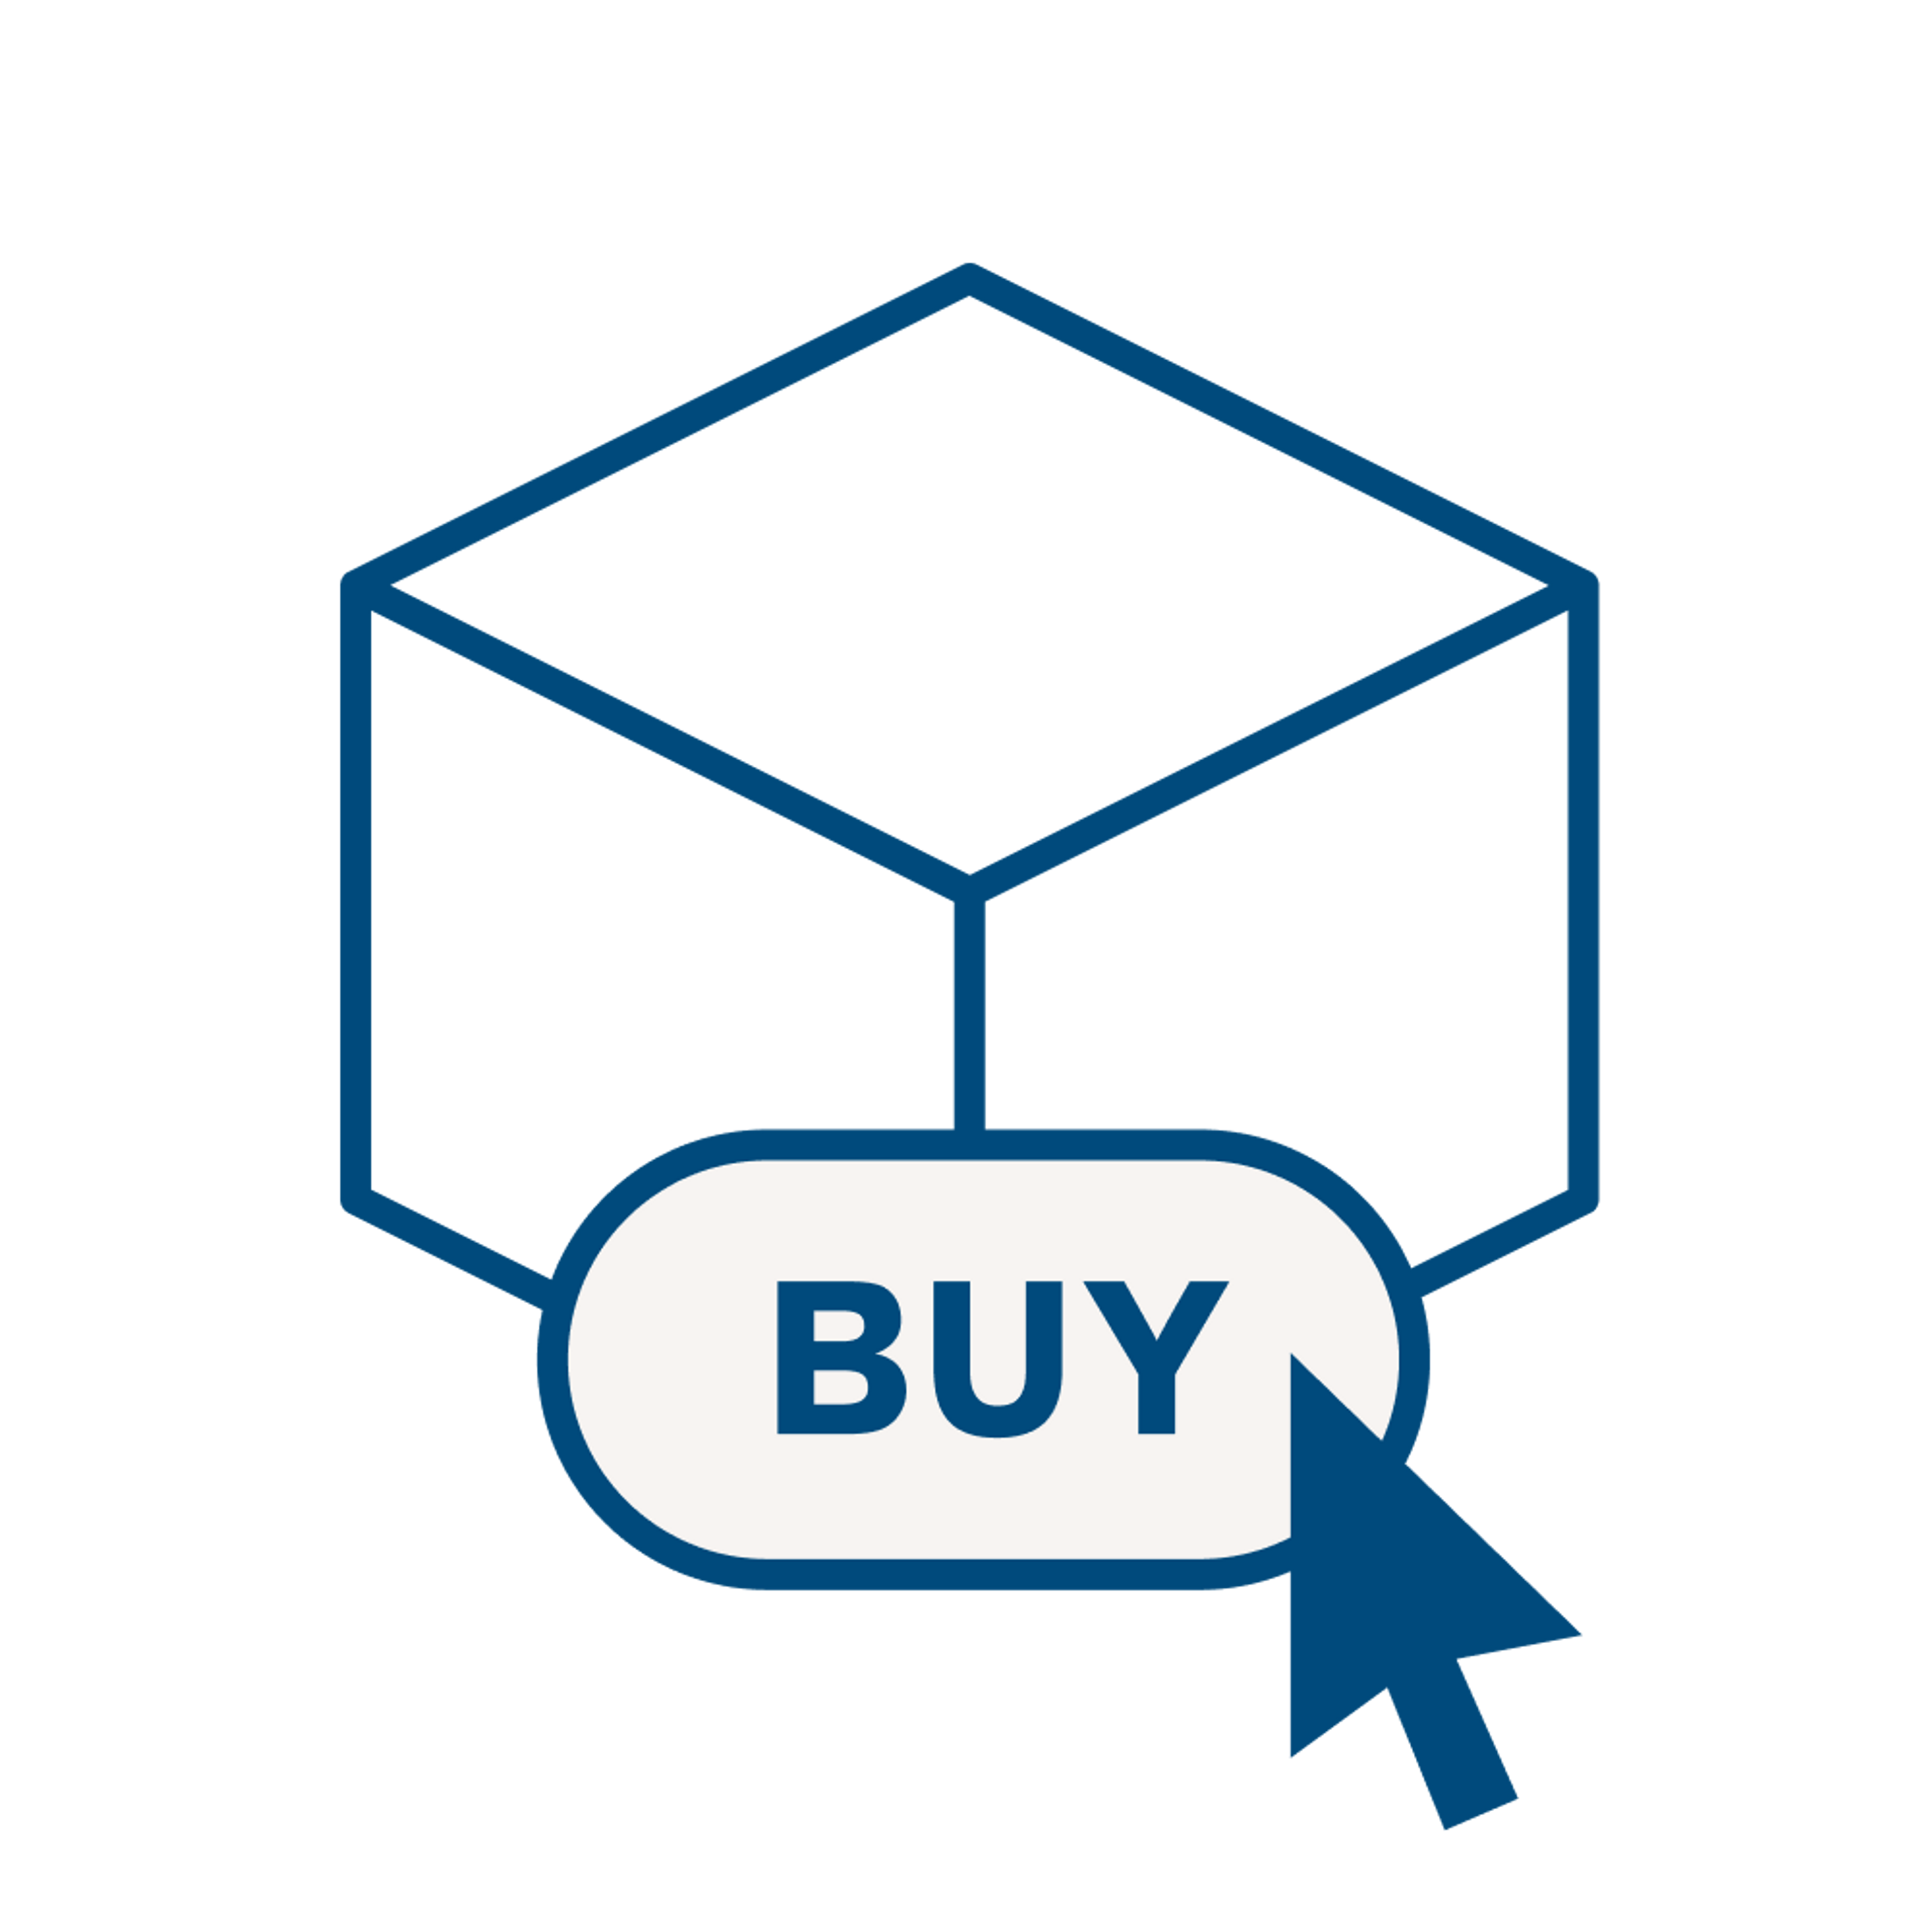 An icon depicting a user clicking 'buy' on a 3D box